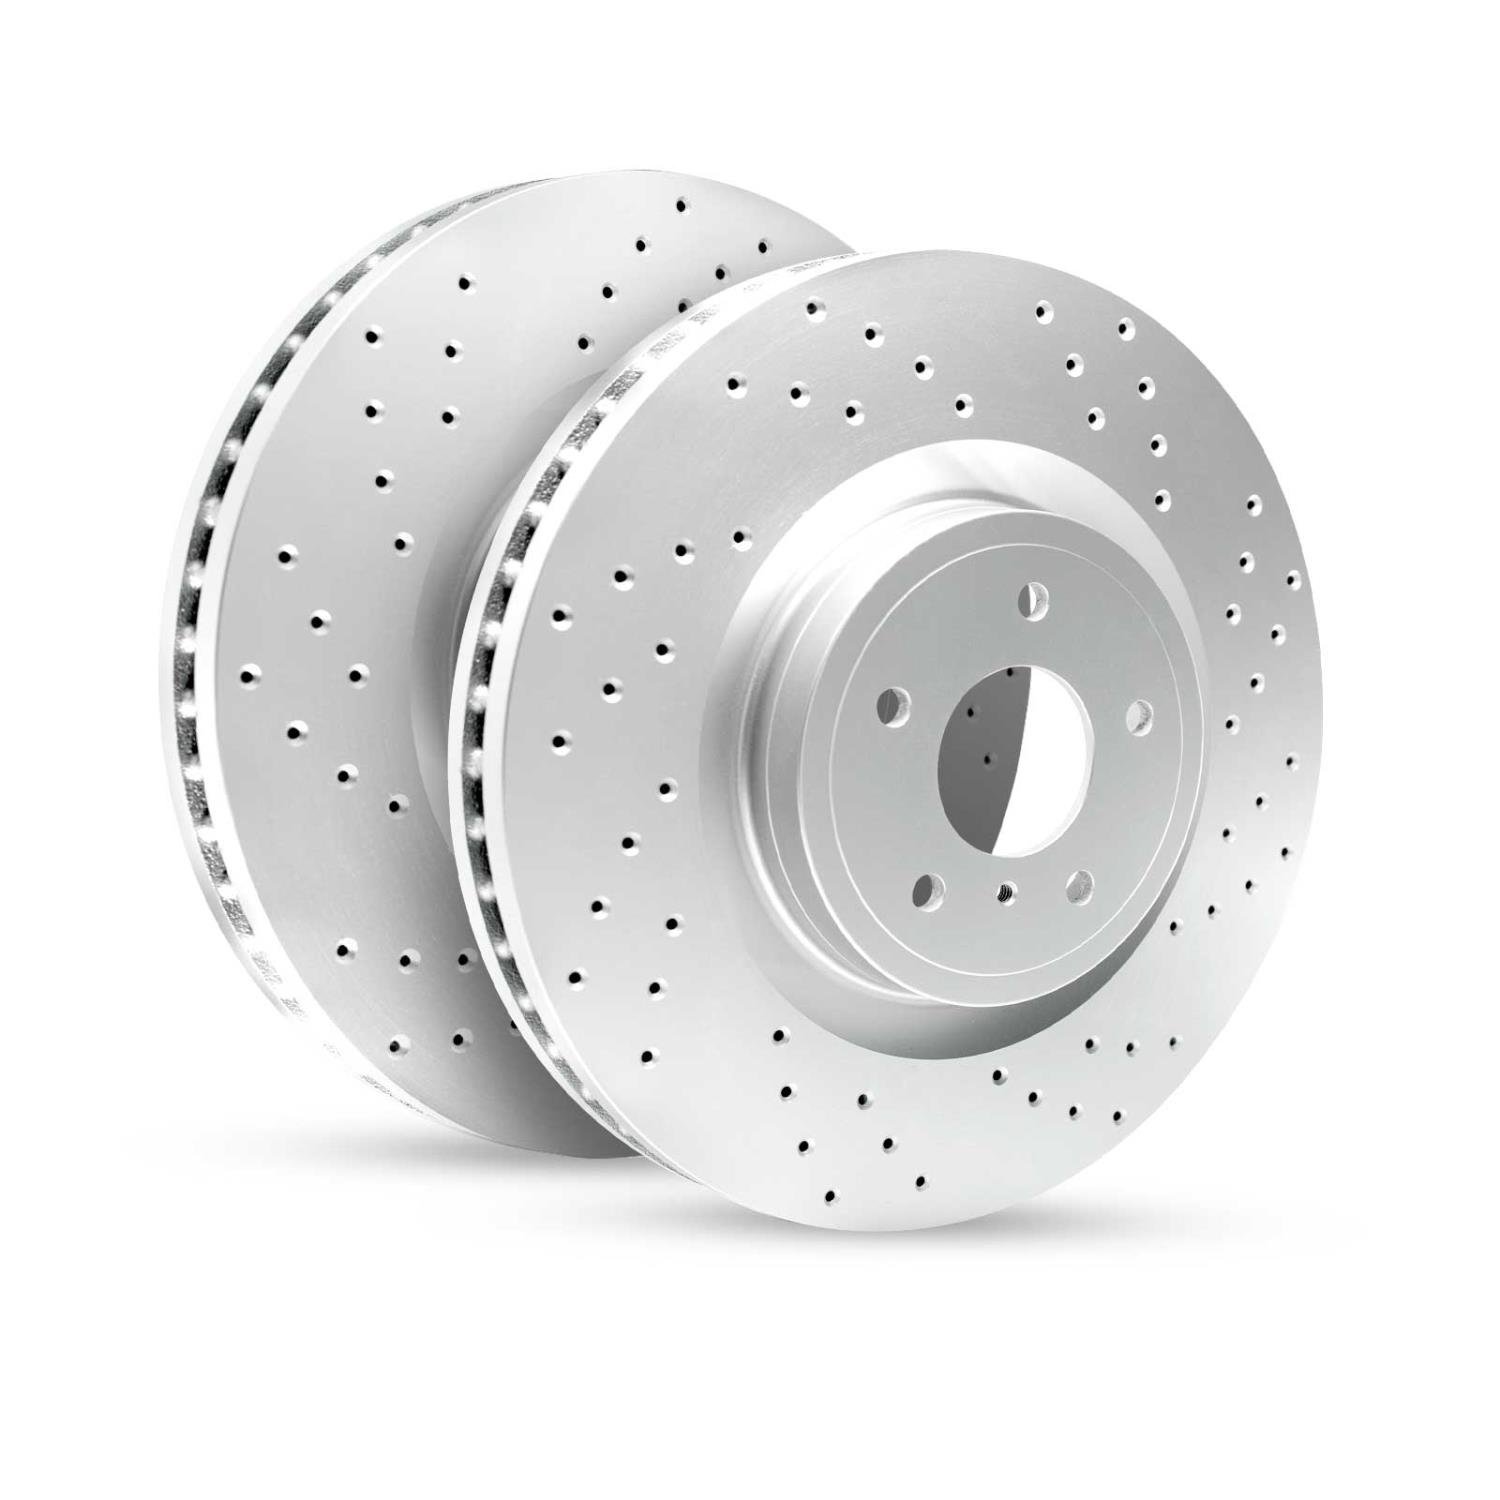 GEO-Carbon Drilled/Slotted Rotors, 2012-2018 Fits Multiple Makes/Models, Position: Front